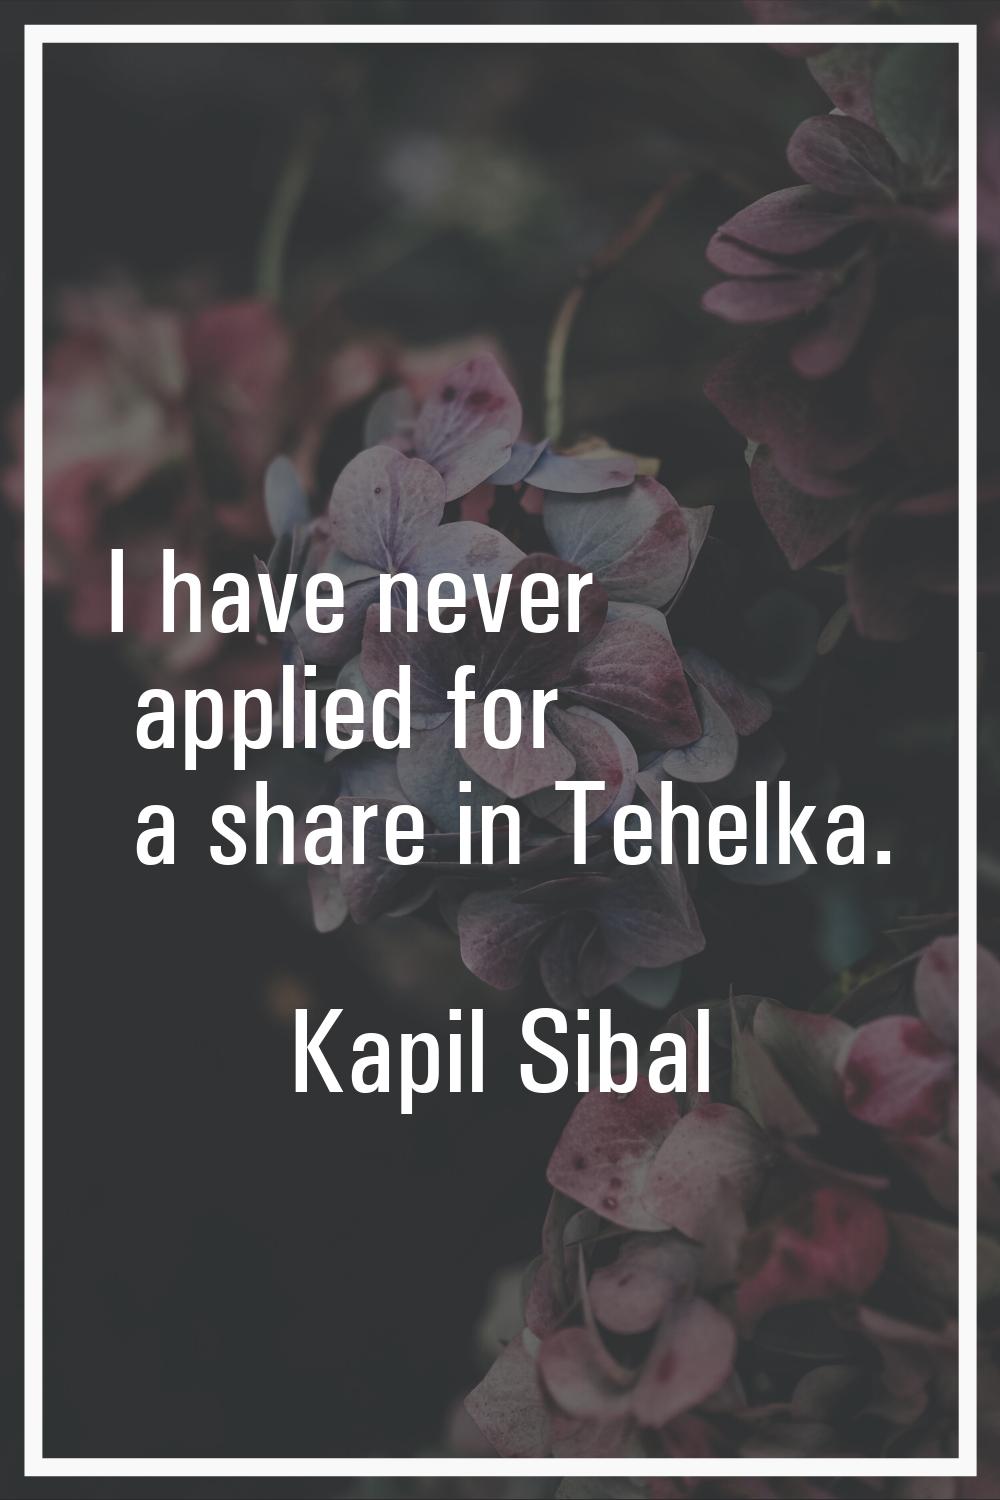 I have never applied for a share in Tehelka.